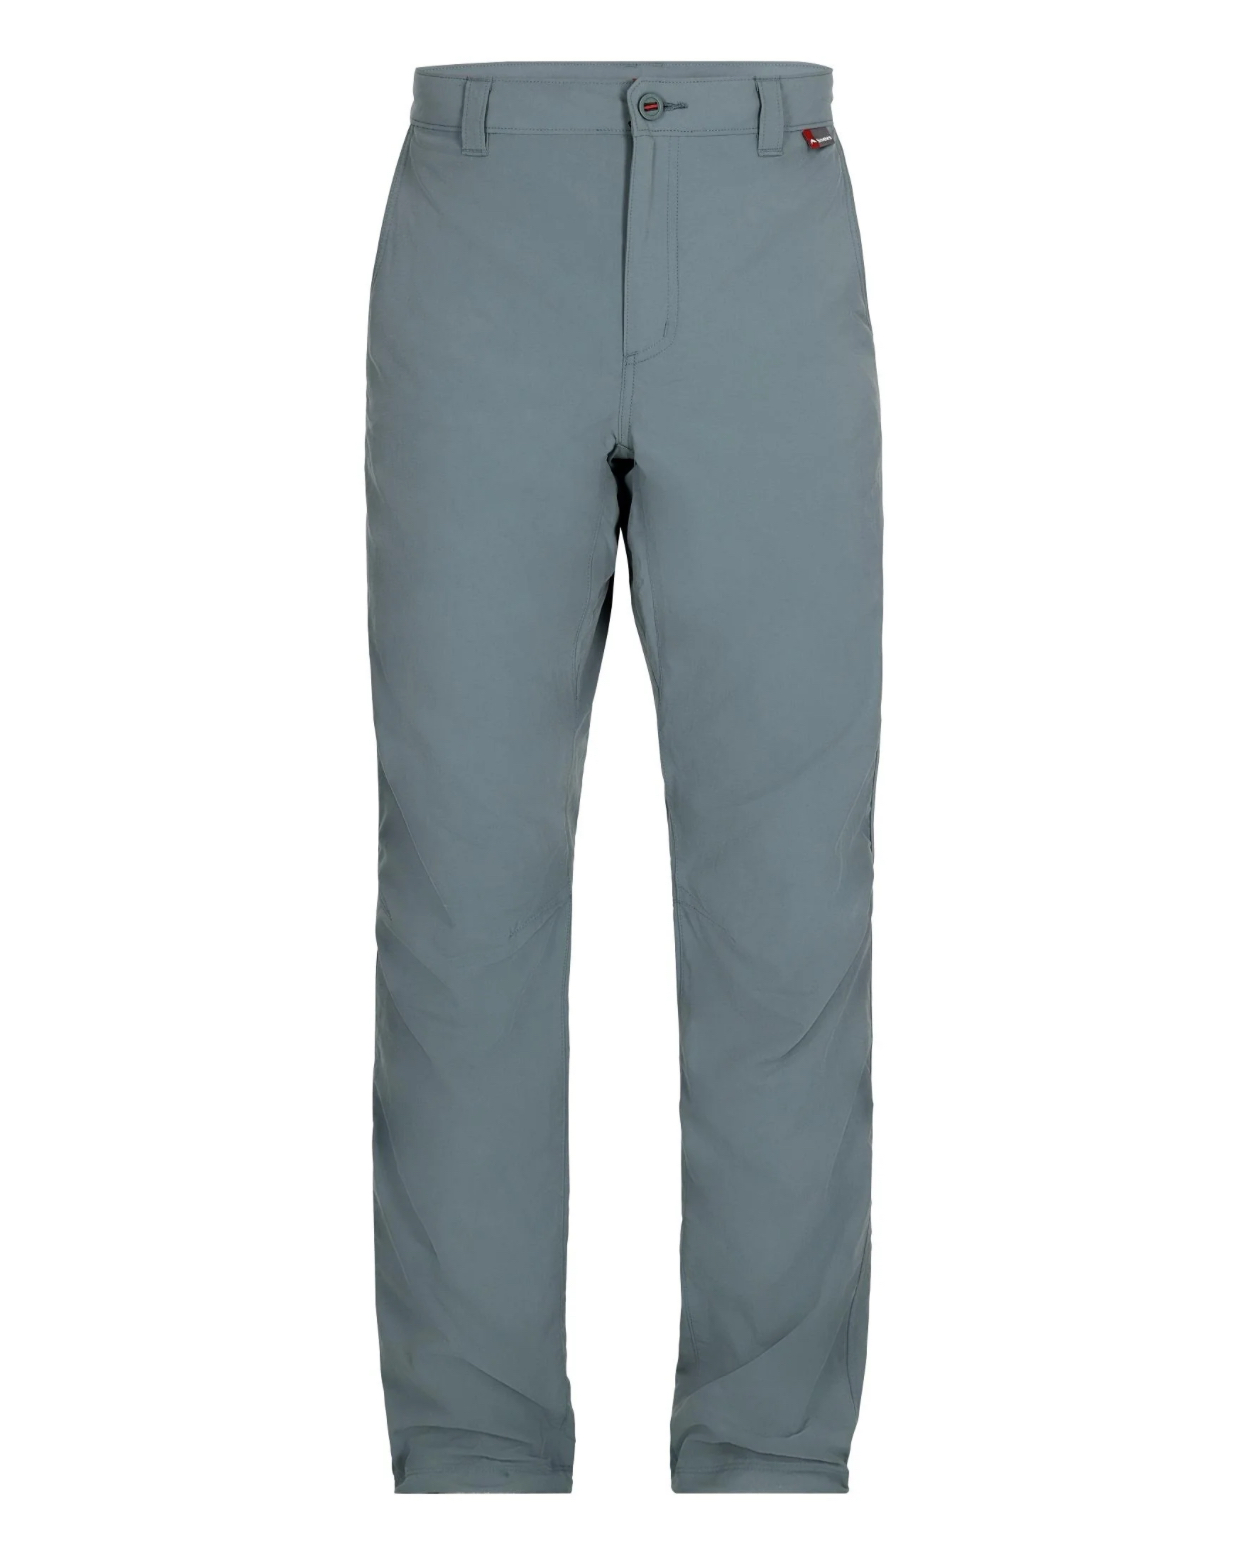 Simms M's Superlight Pant - Storm - Small (32